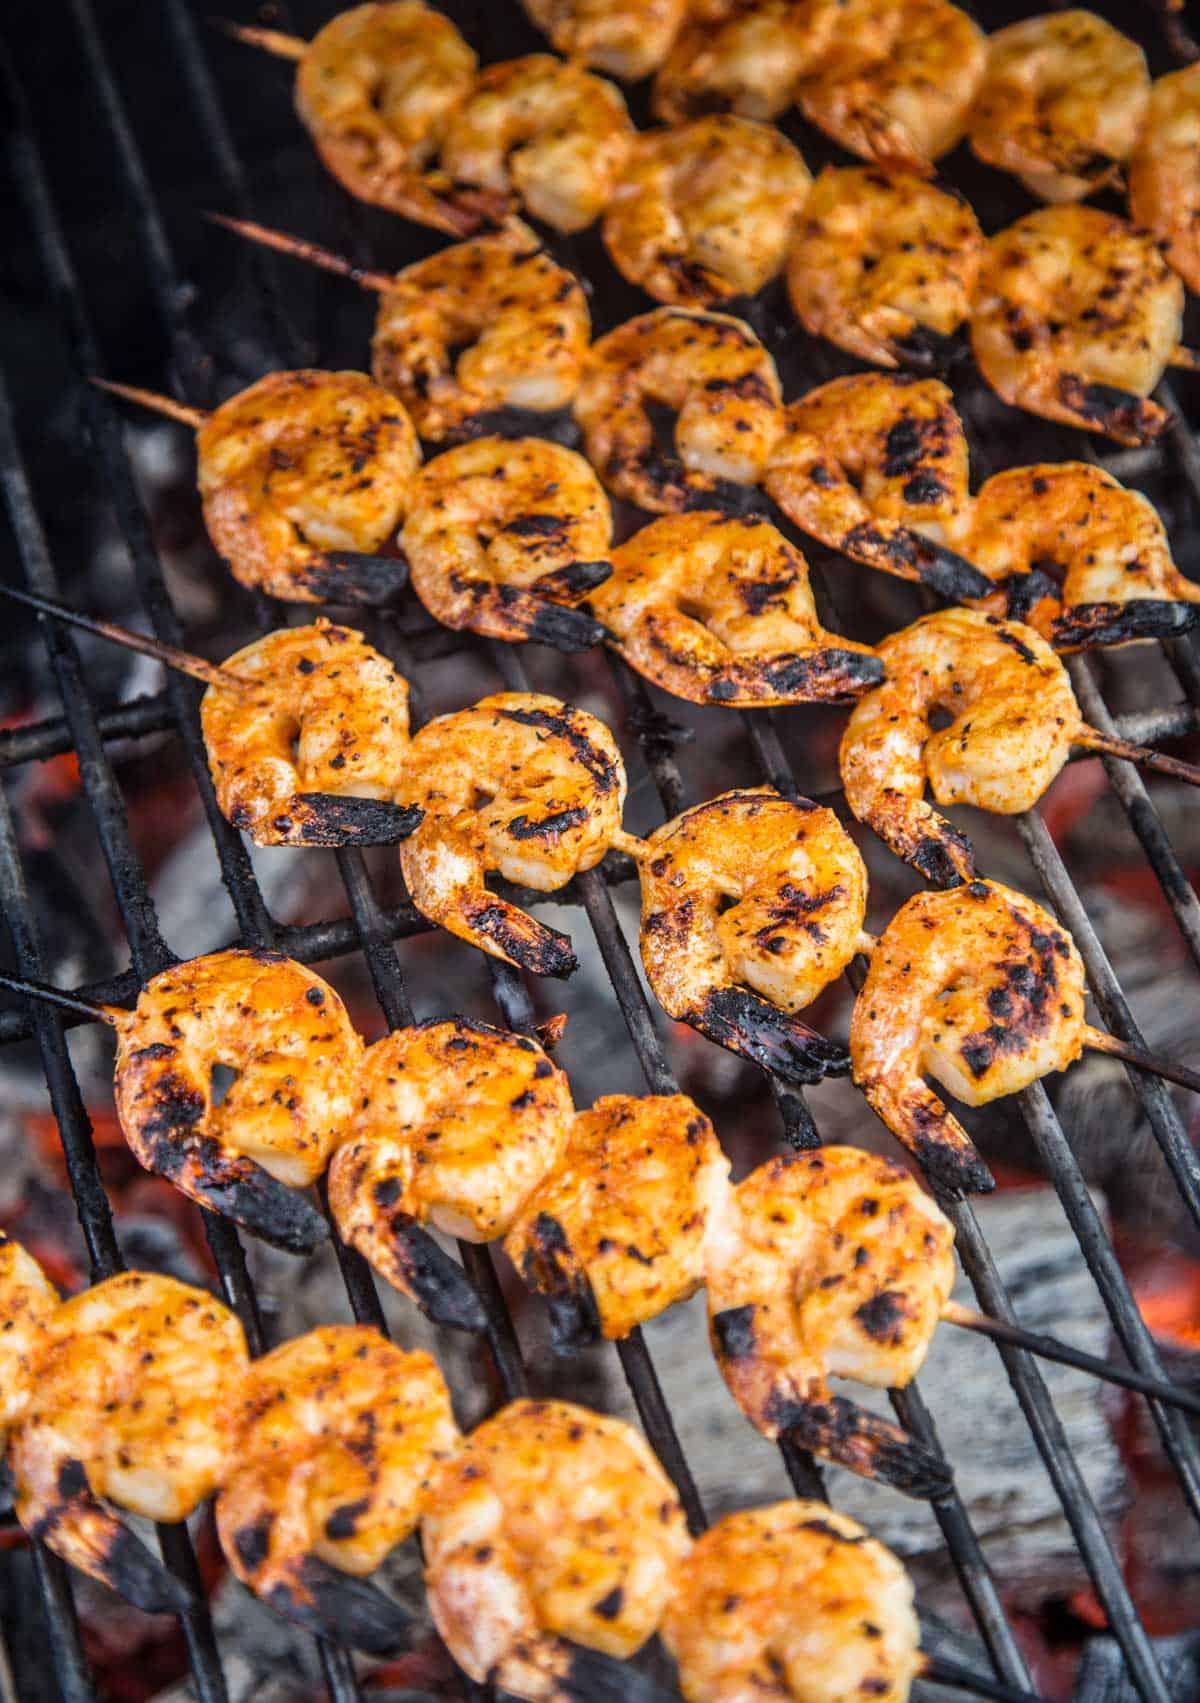 Skewers of shrimp cooking on the grill.